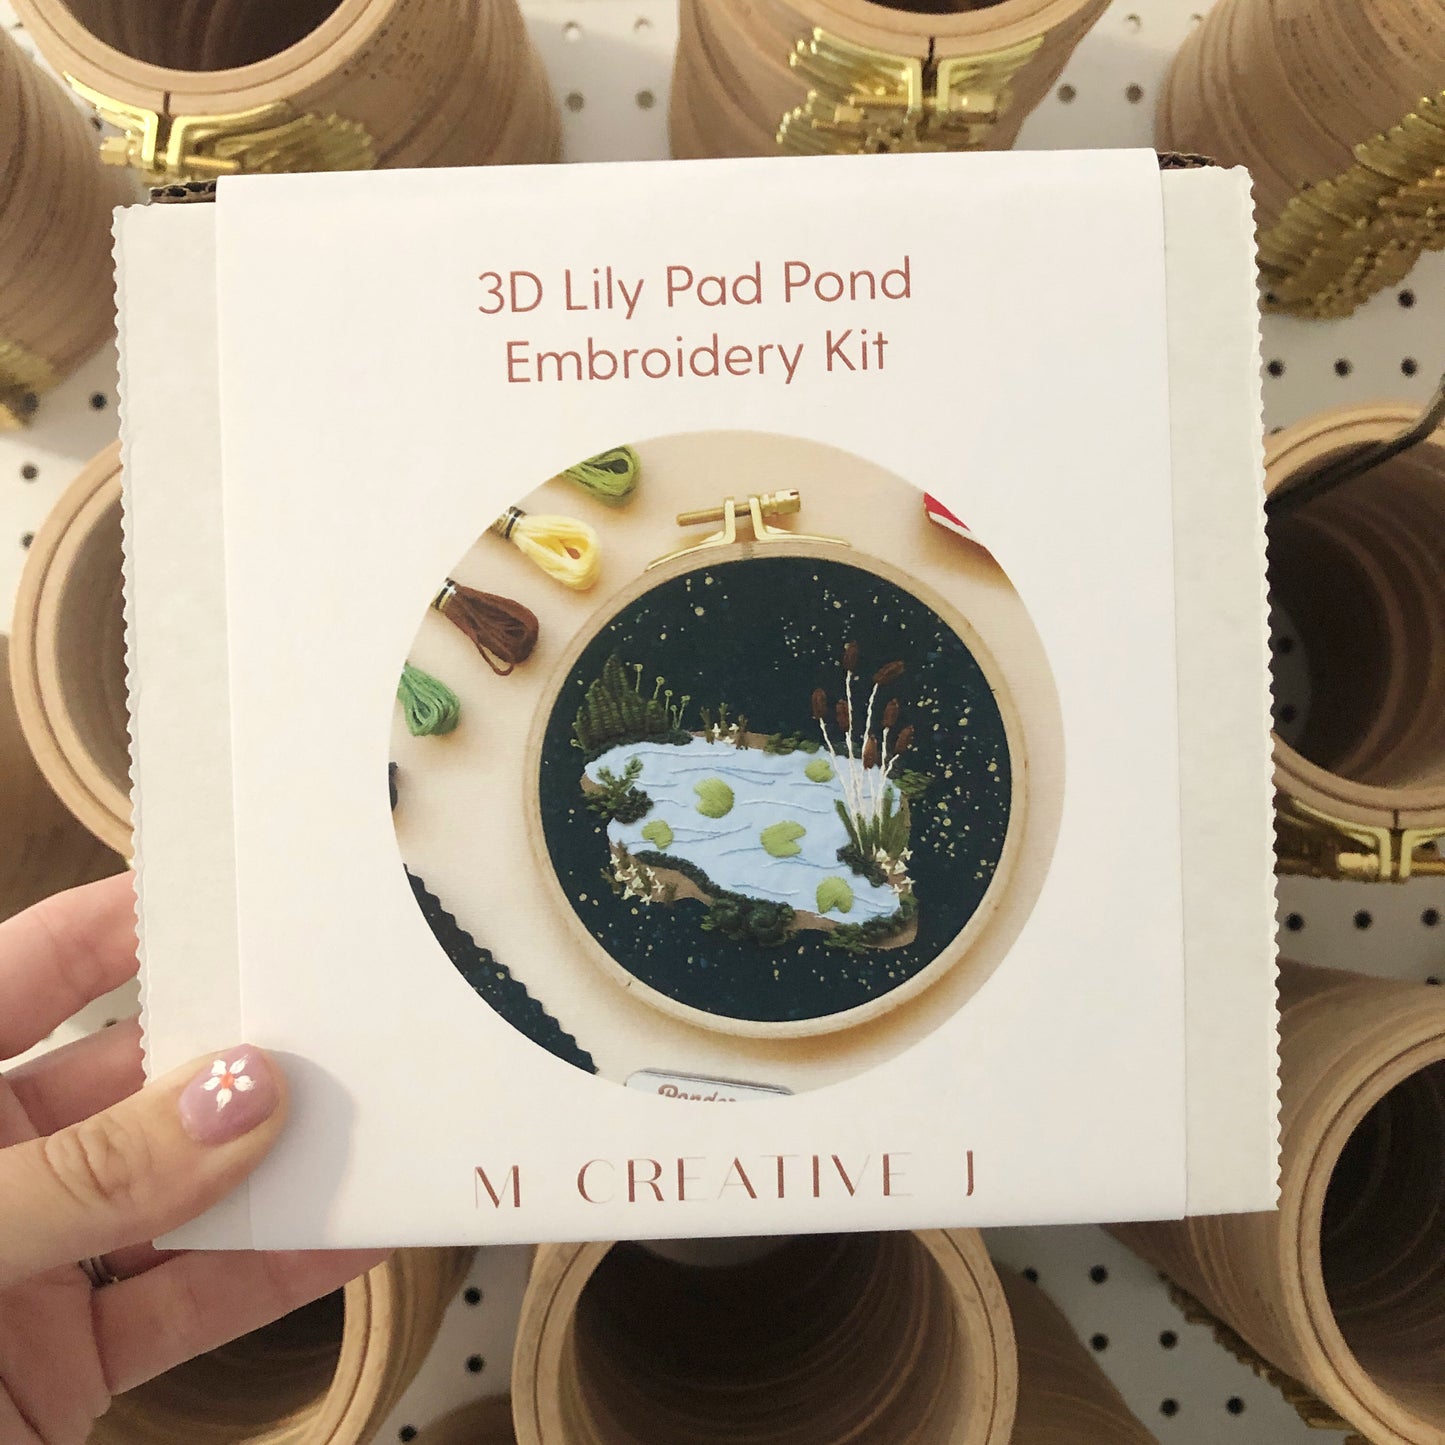 3D Lily Pad Pond - Advanced Hand Embroidery DIY Craft Kit